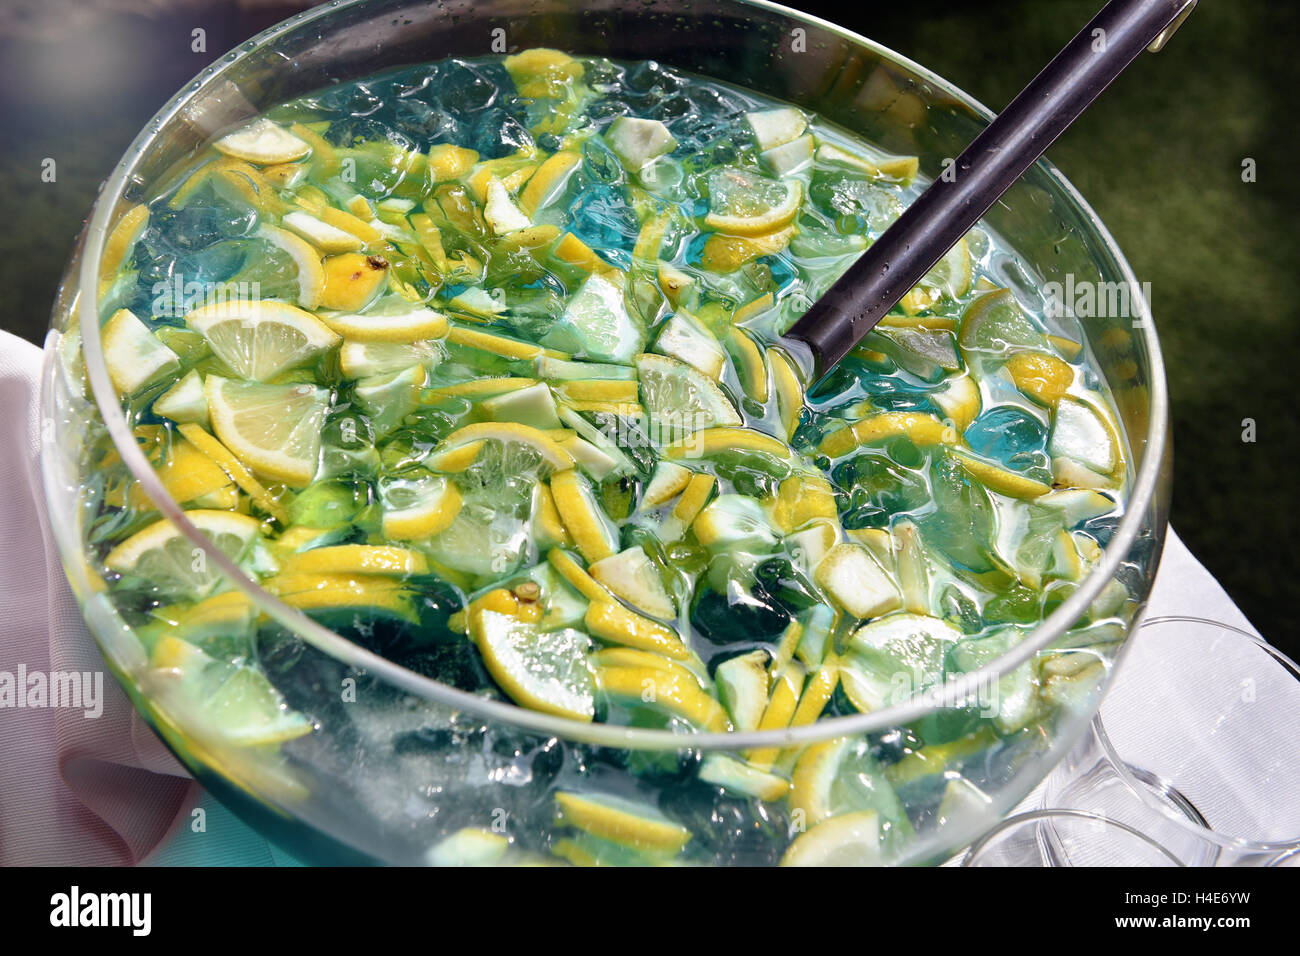 Sliced fresh lemon and ice in a refreshing bowl of summer beverage with a ladle for serving it viewed close up high angle Stock Photo